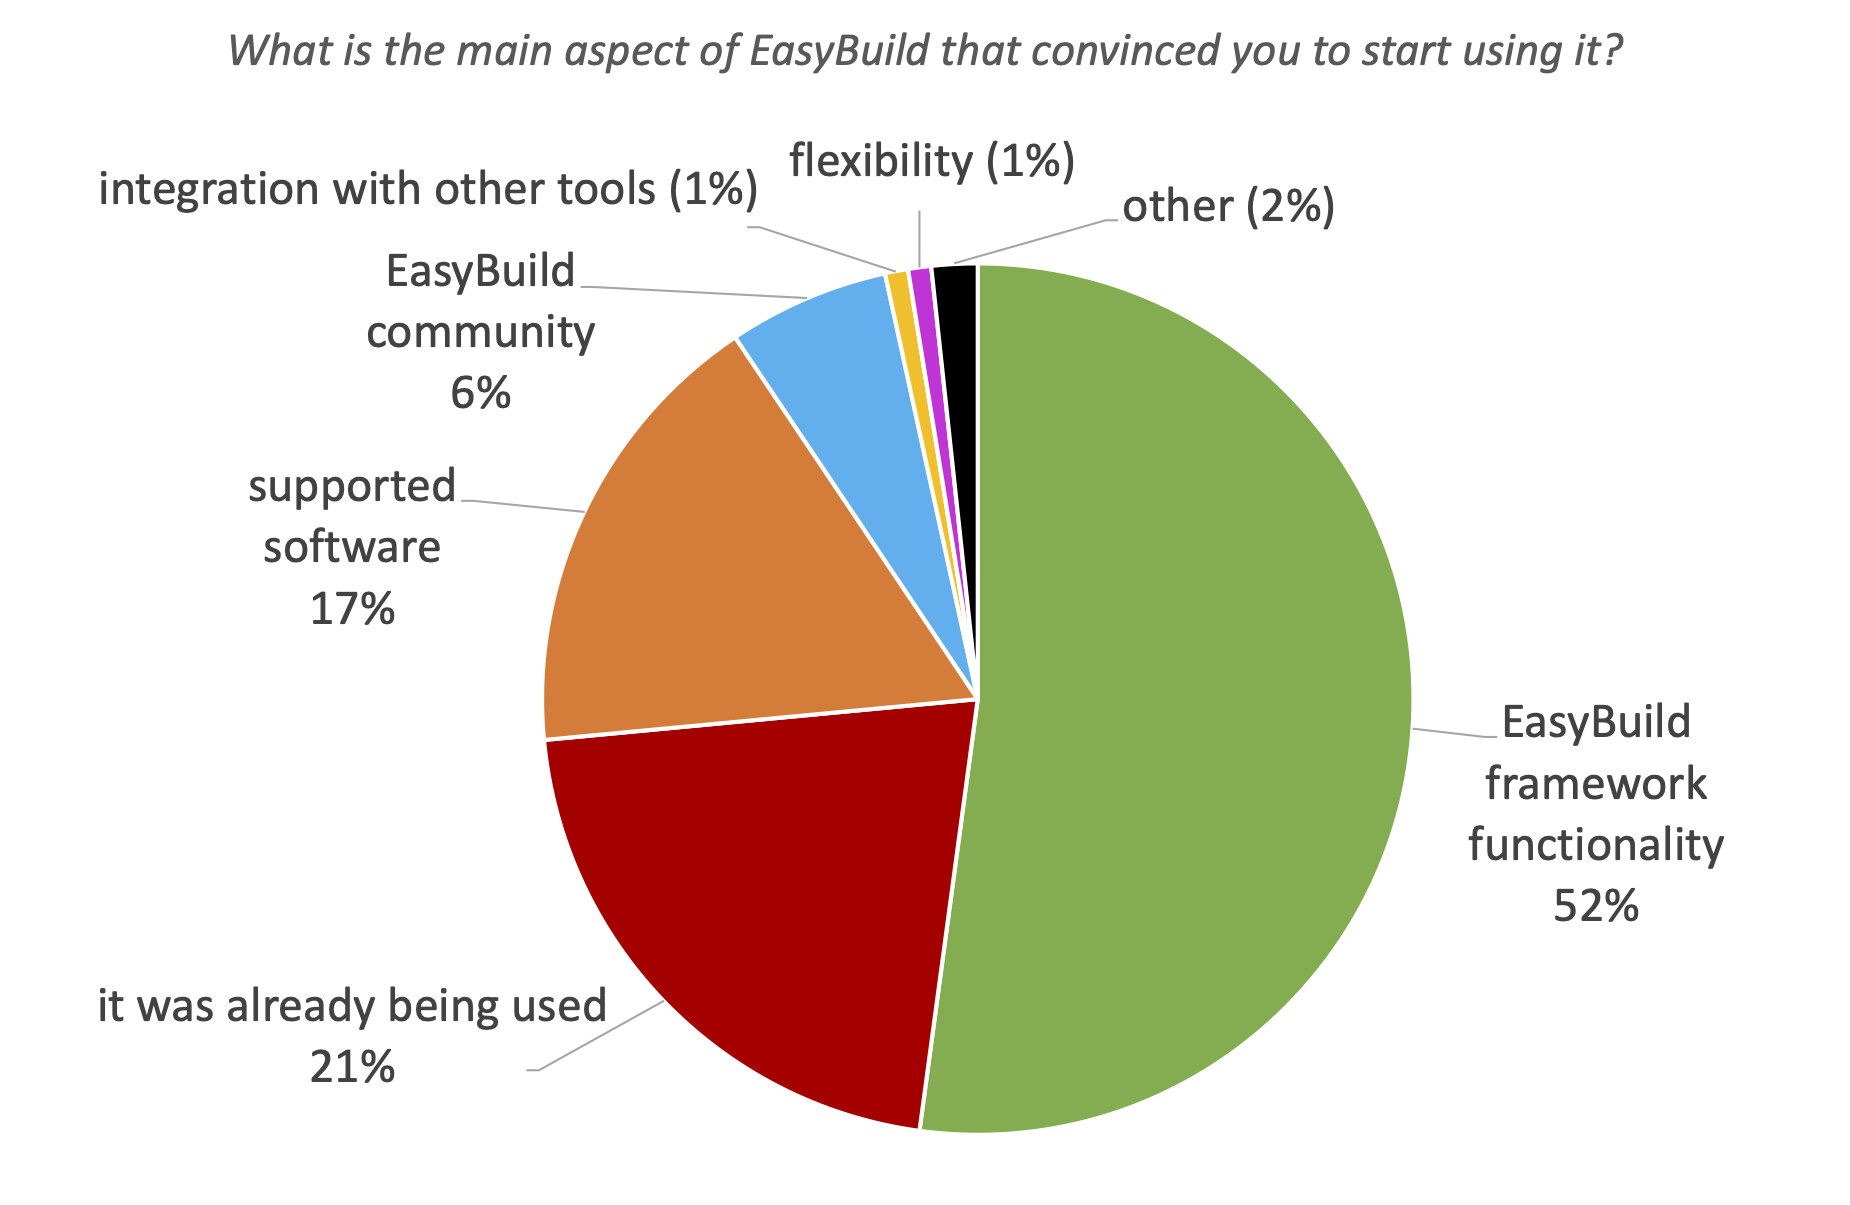 07. What is the main aspect of EasyBuild that convinced you to start using it?